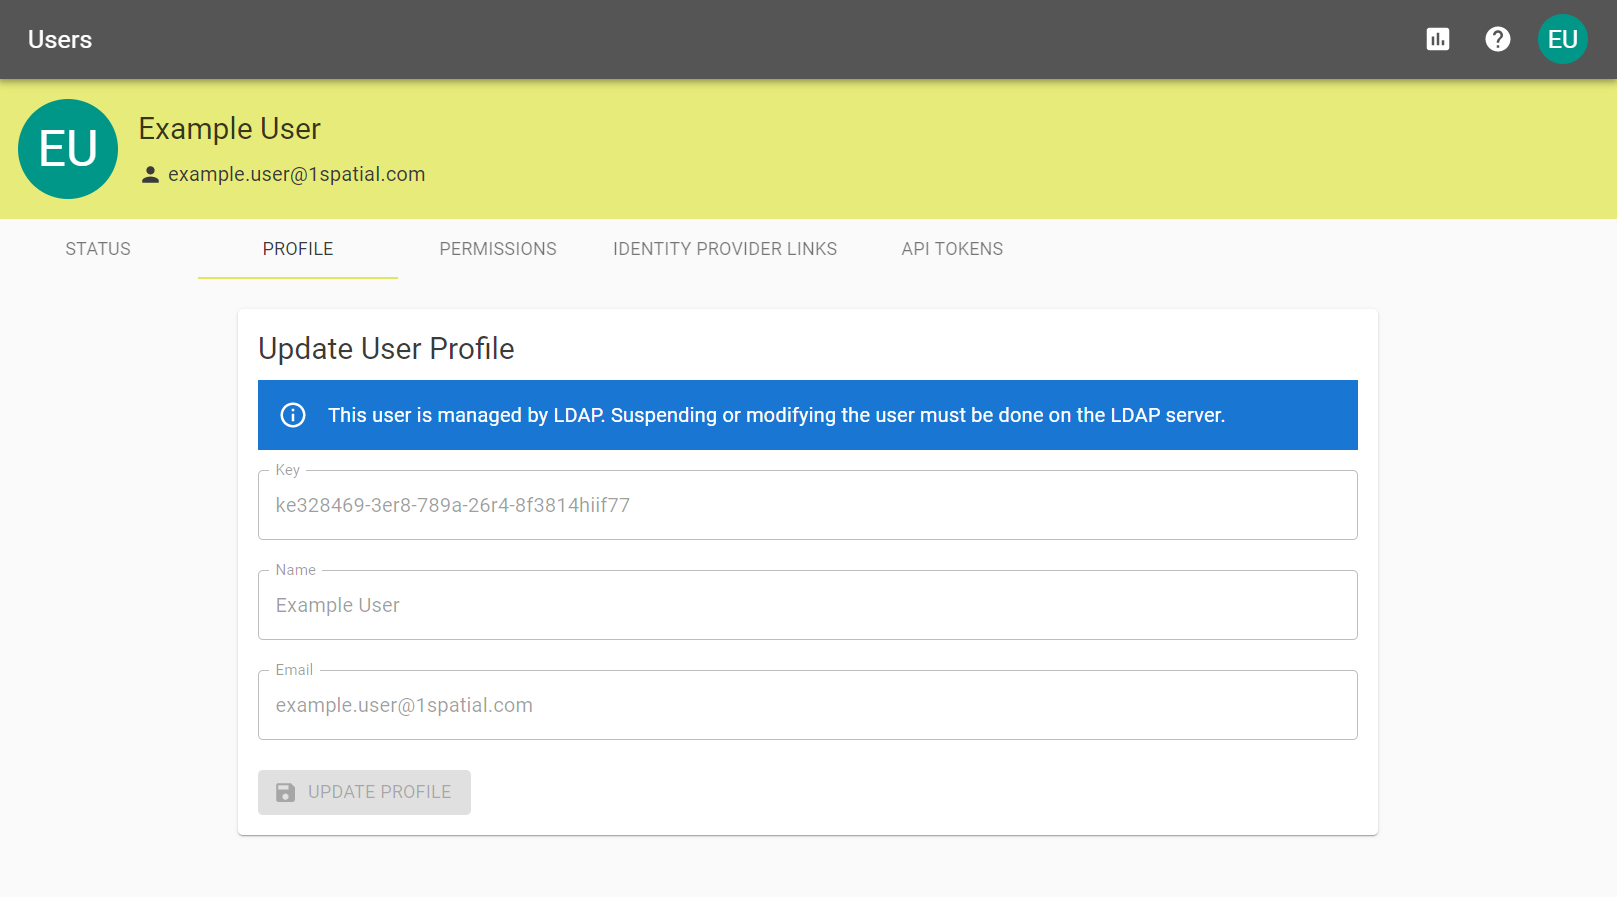 The User Profile page where details are editable when not managed by LDAP like in the example.